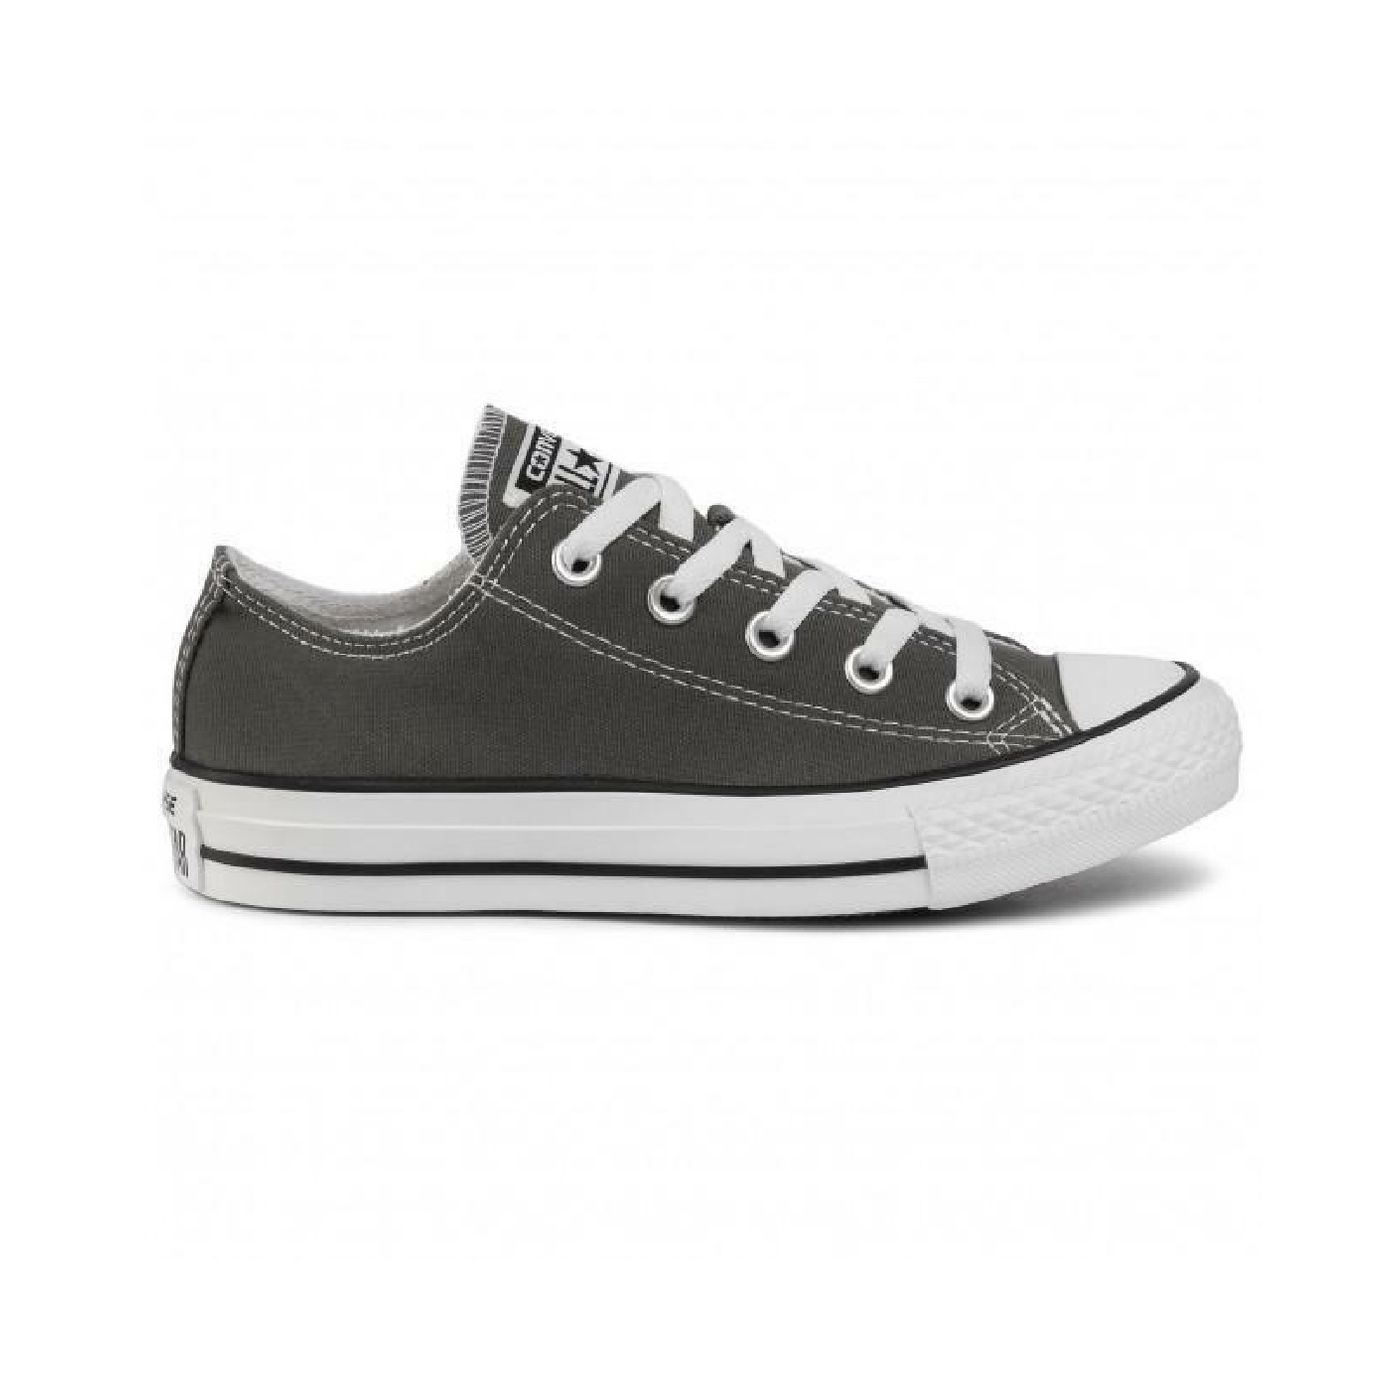 Converse All Star OX Charcoal Grigio Siderale 1j794C